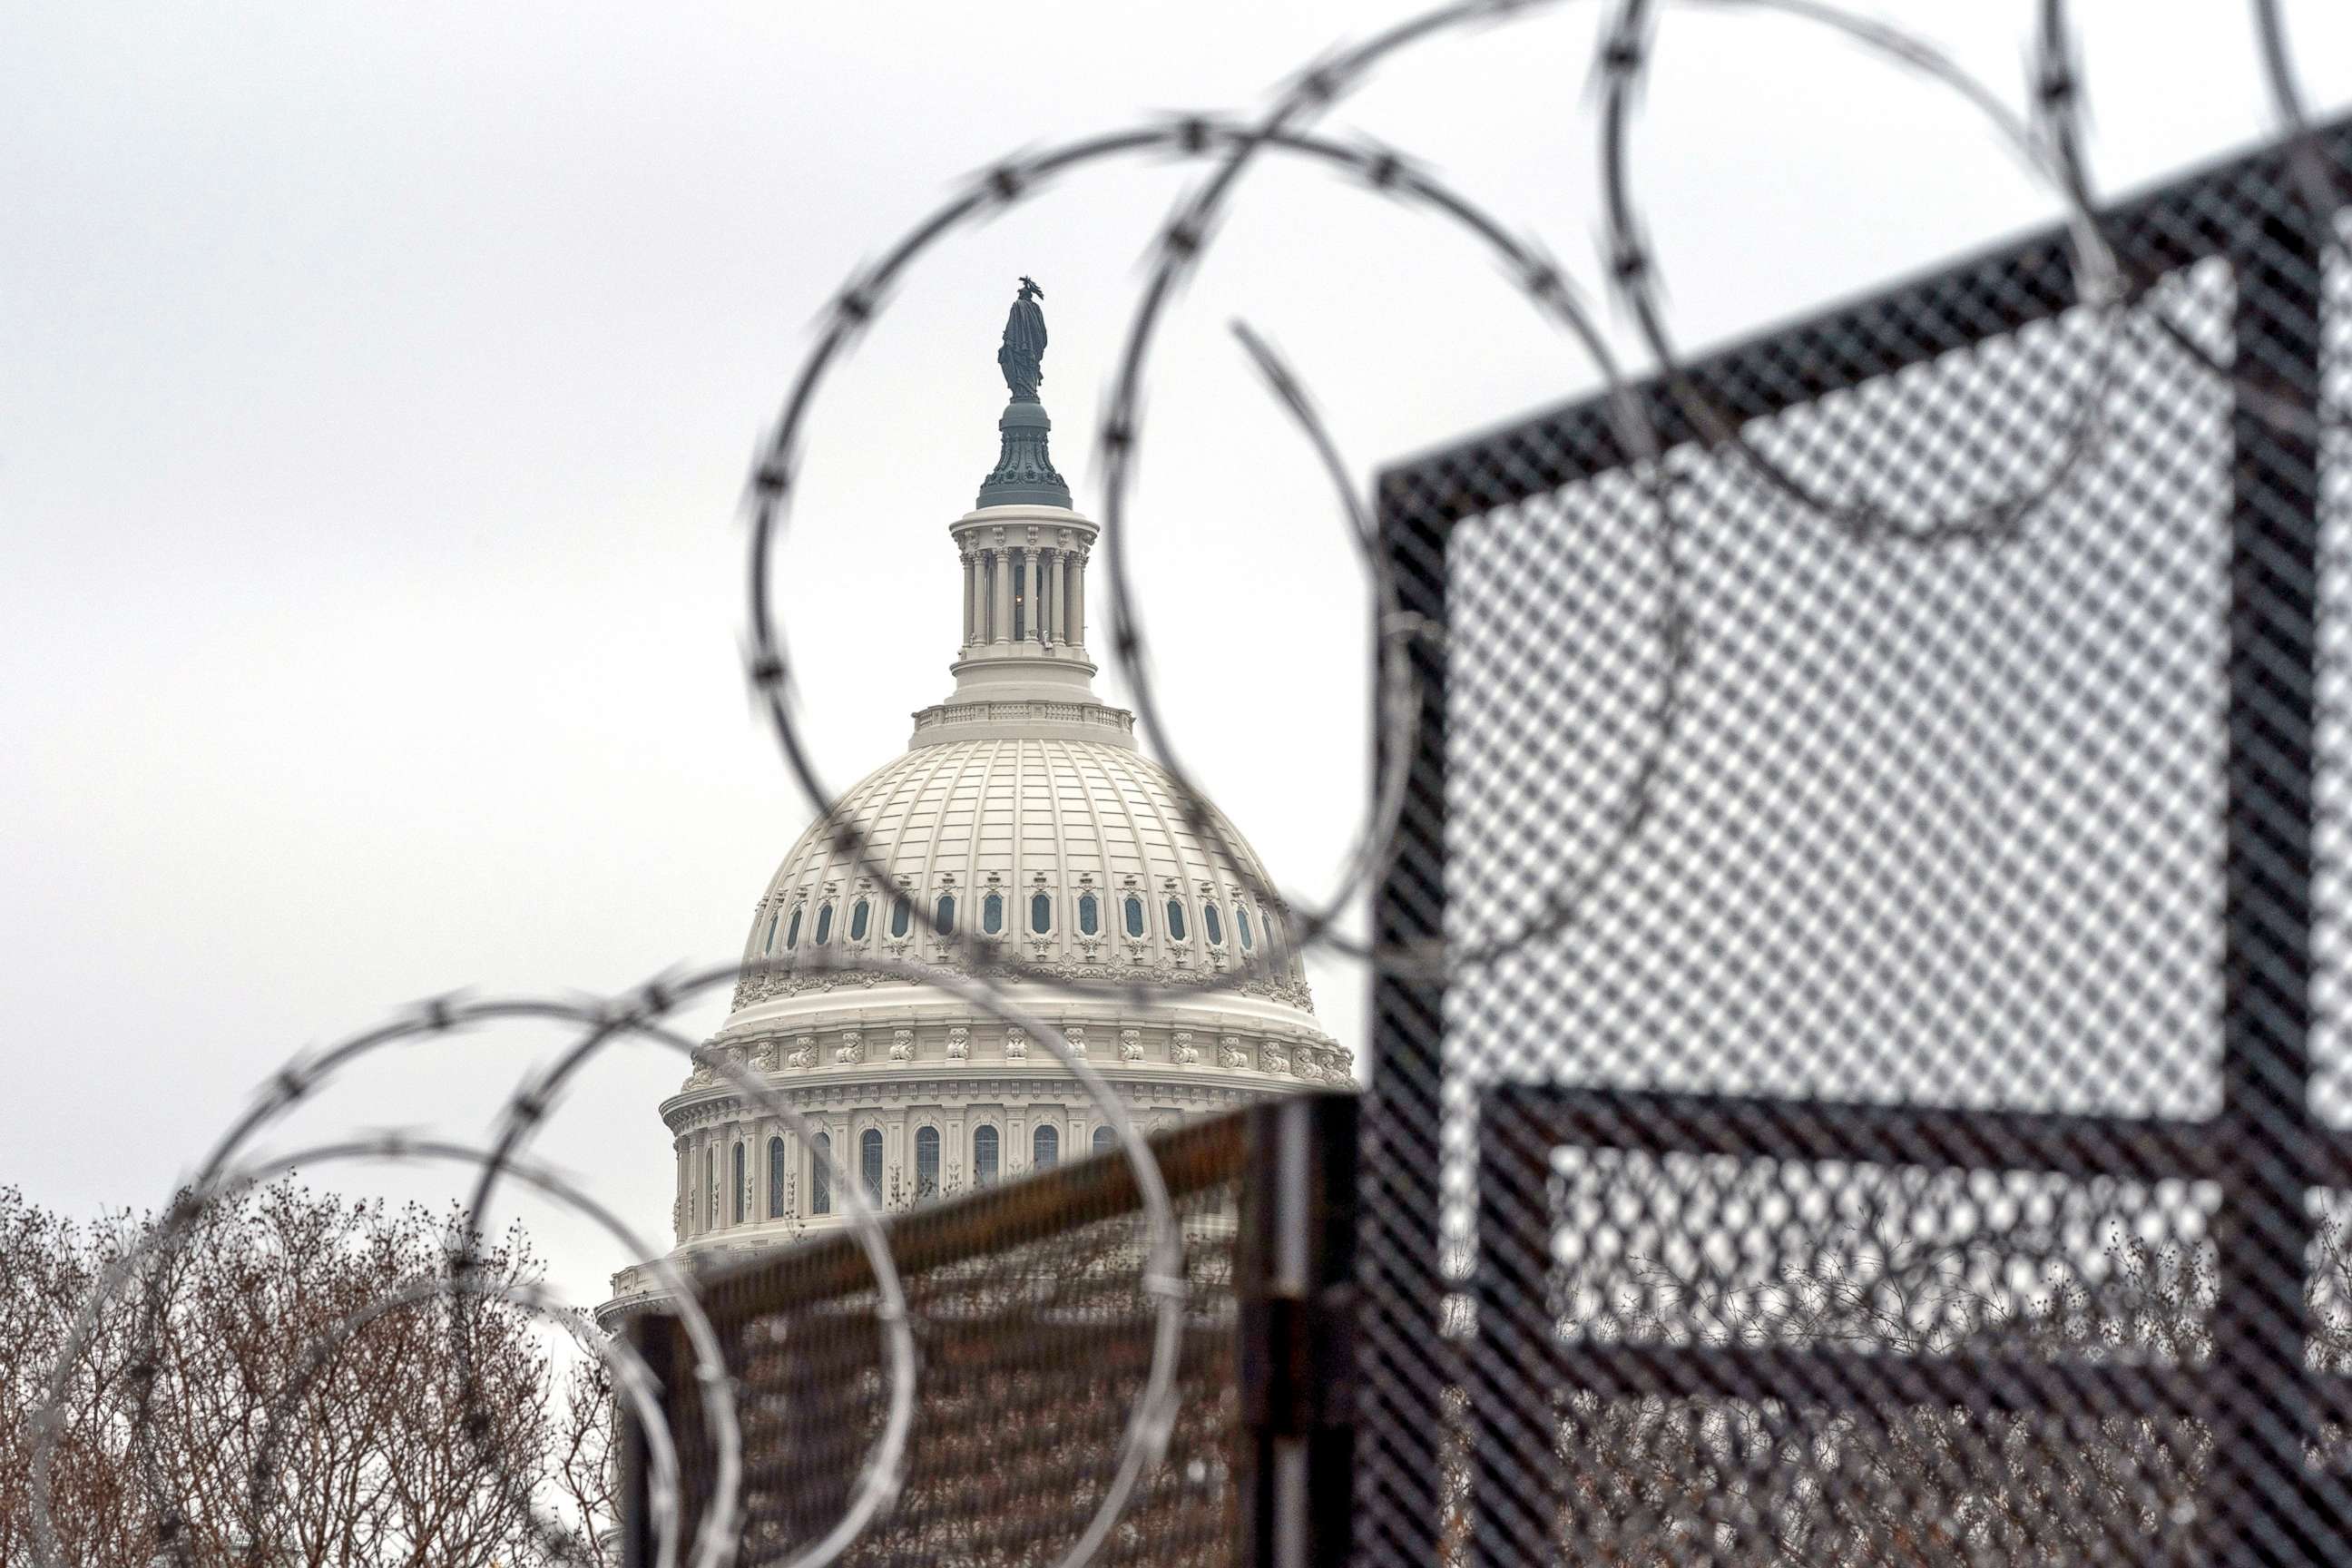 PHOTO: Razor wire tops the anti-scaling fence surrounding the perimetter of the U.S. Capitol, Feb. 11, 2021, in Washington, D.C. 